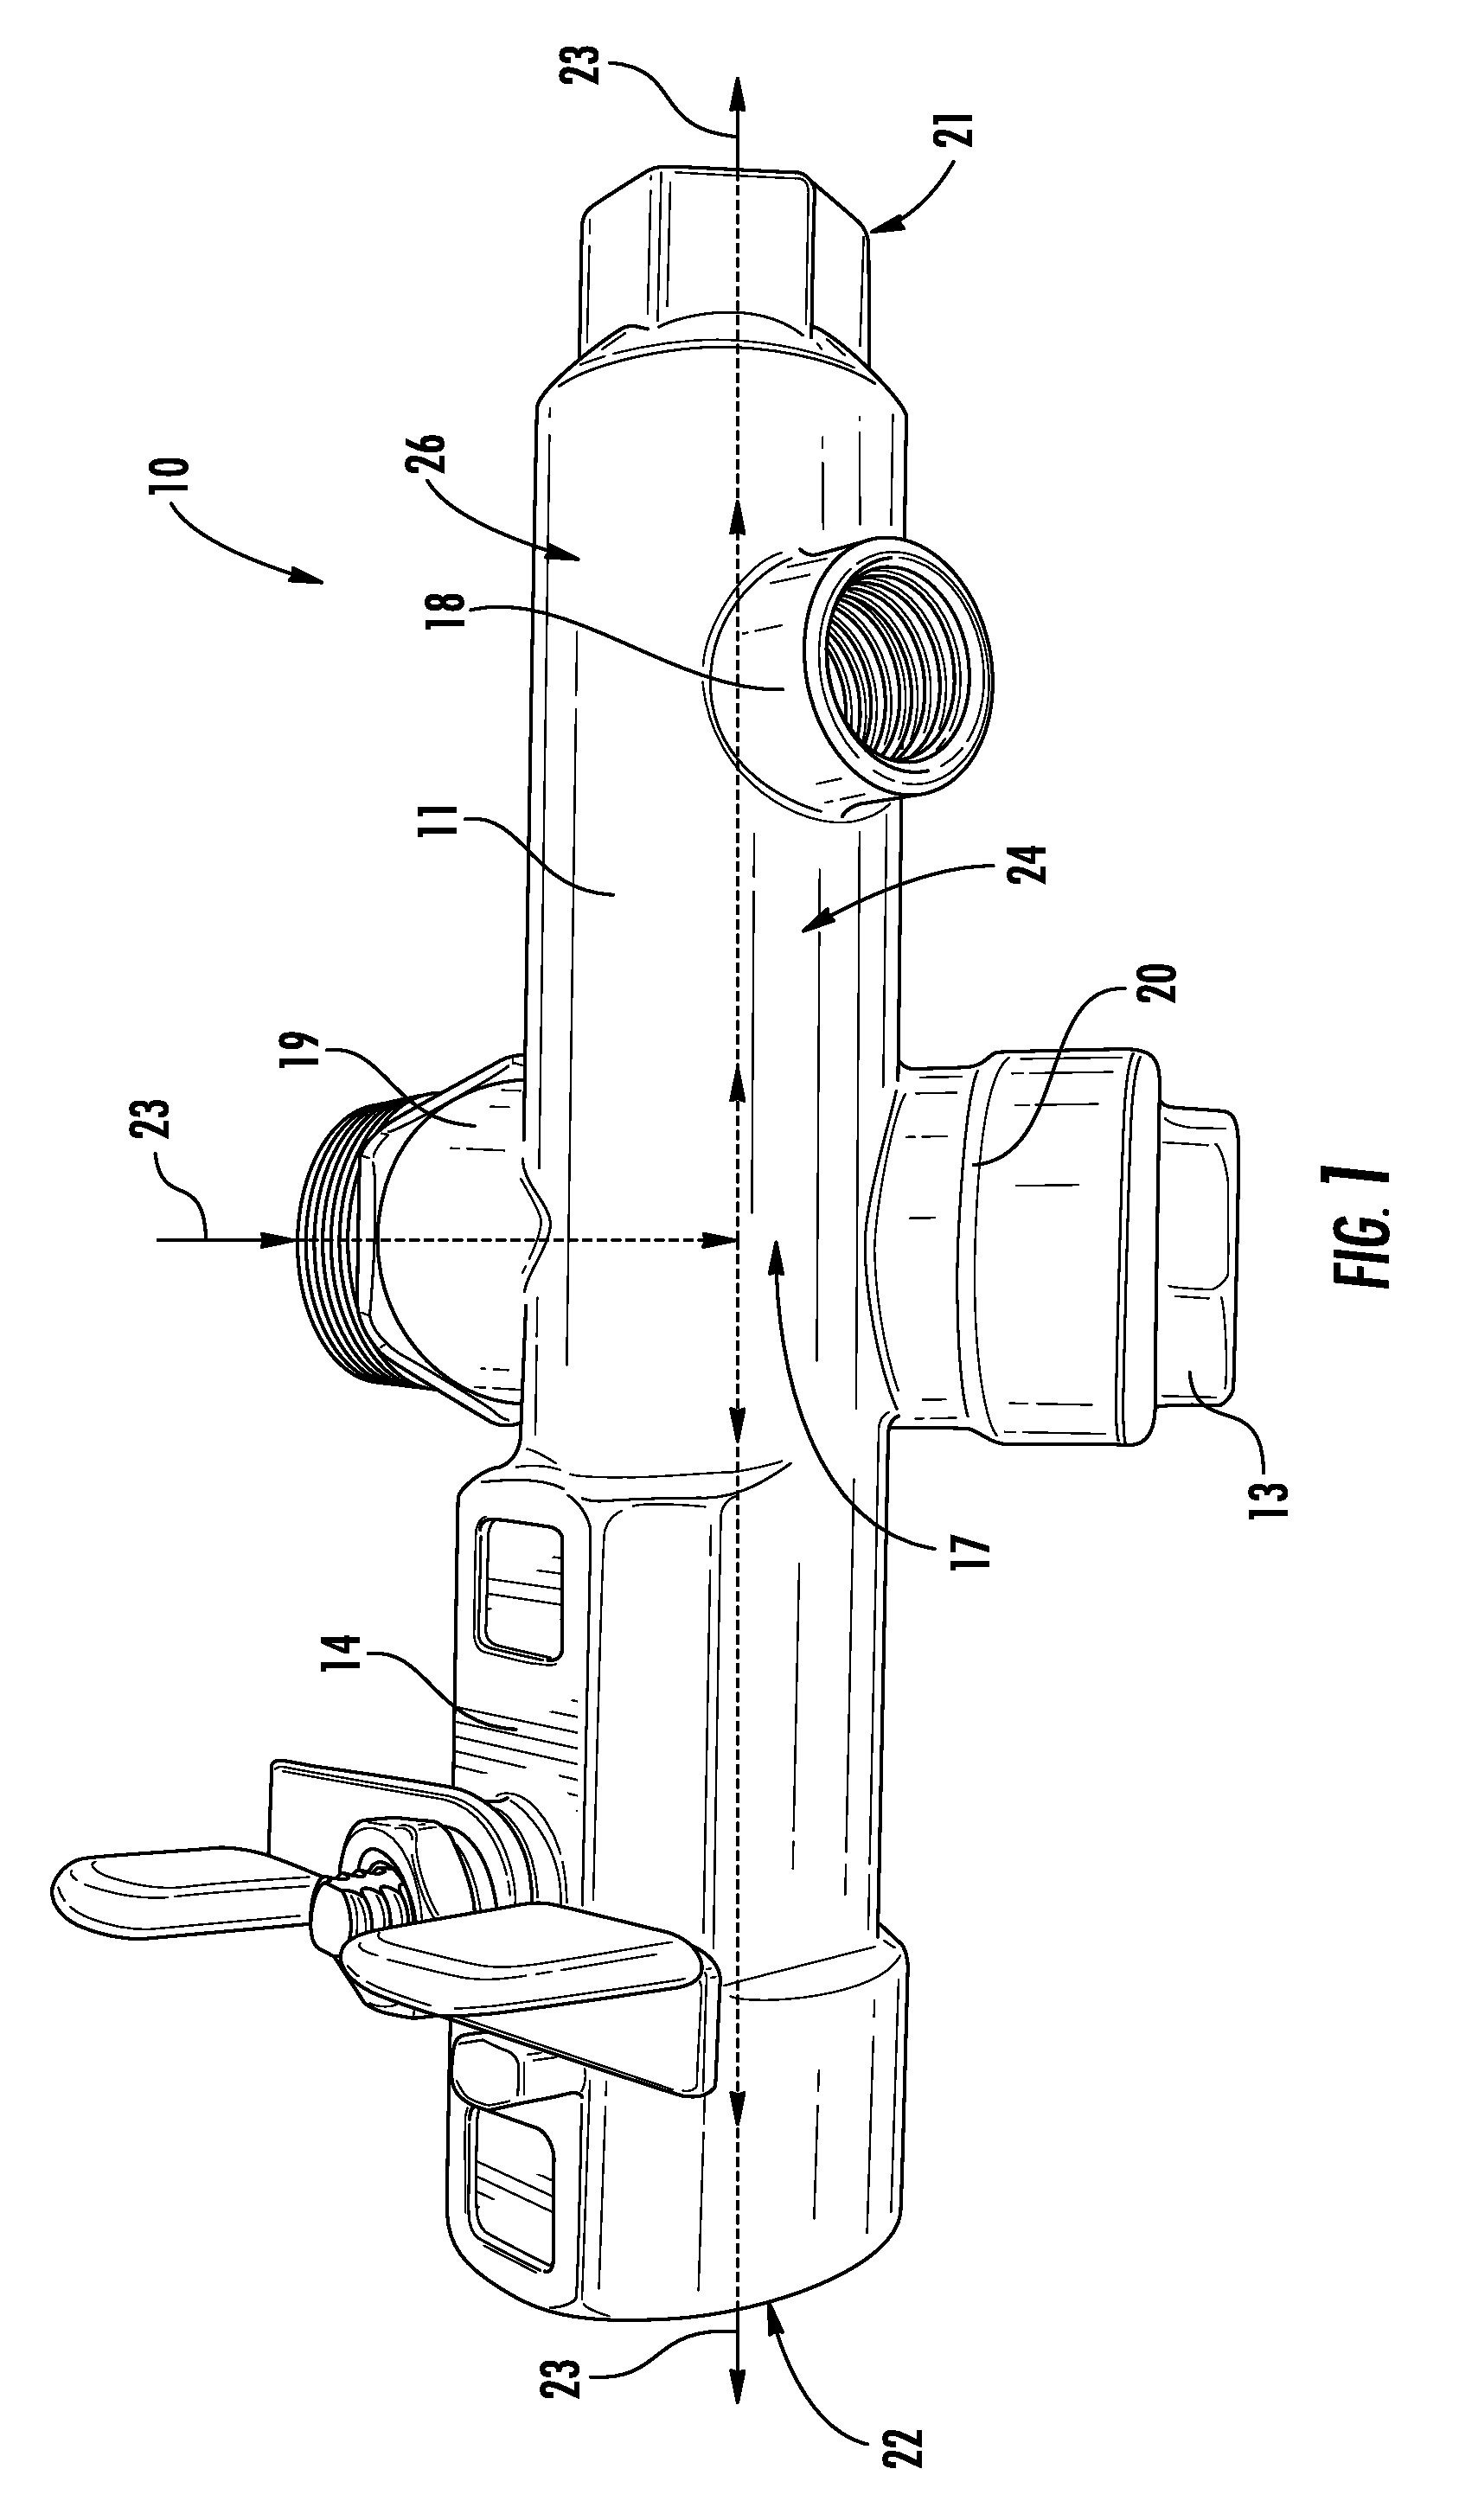 Multi-port valve device with dual directional strainer